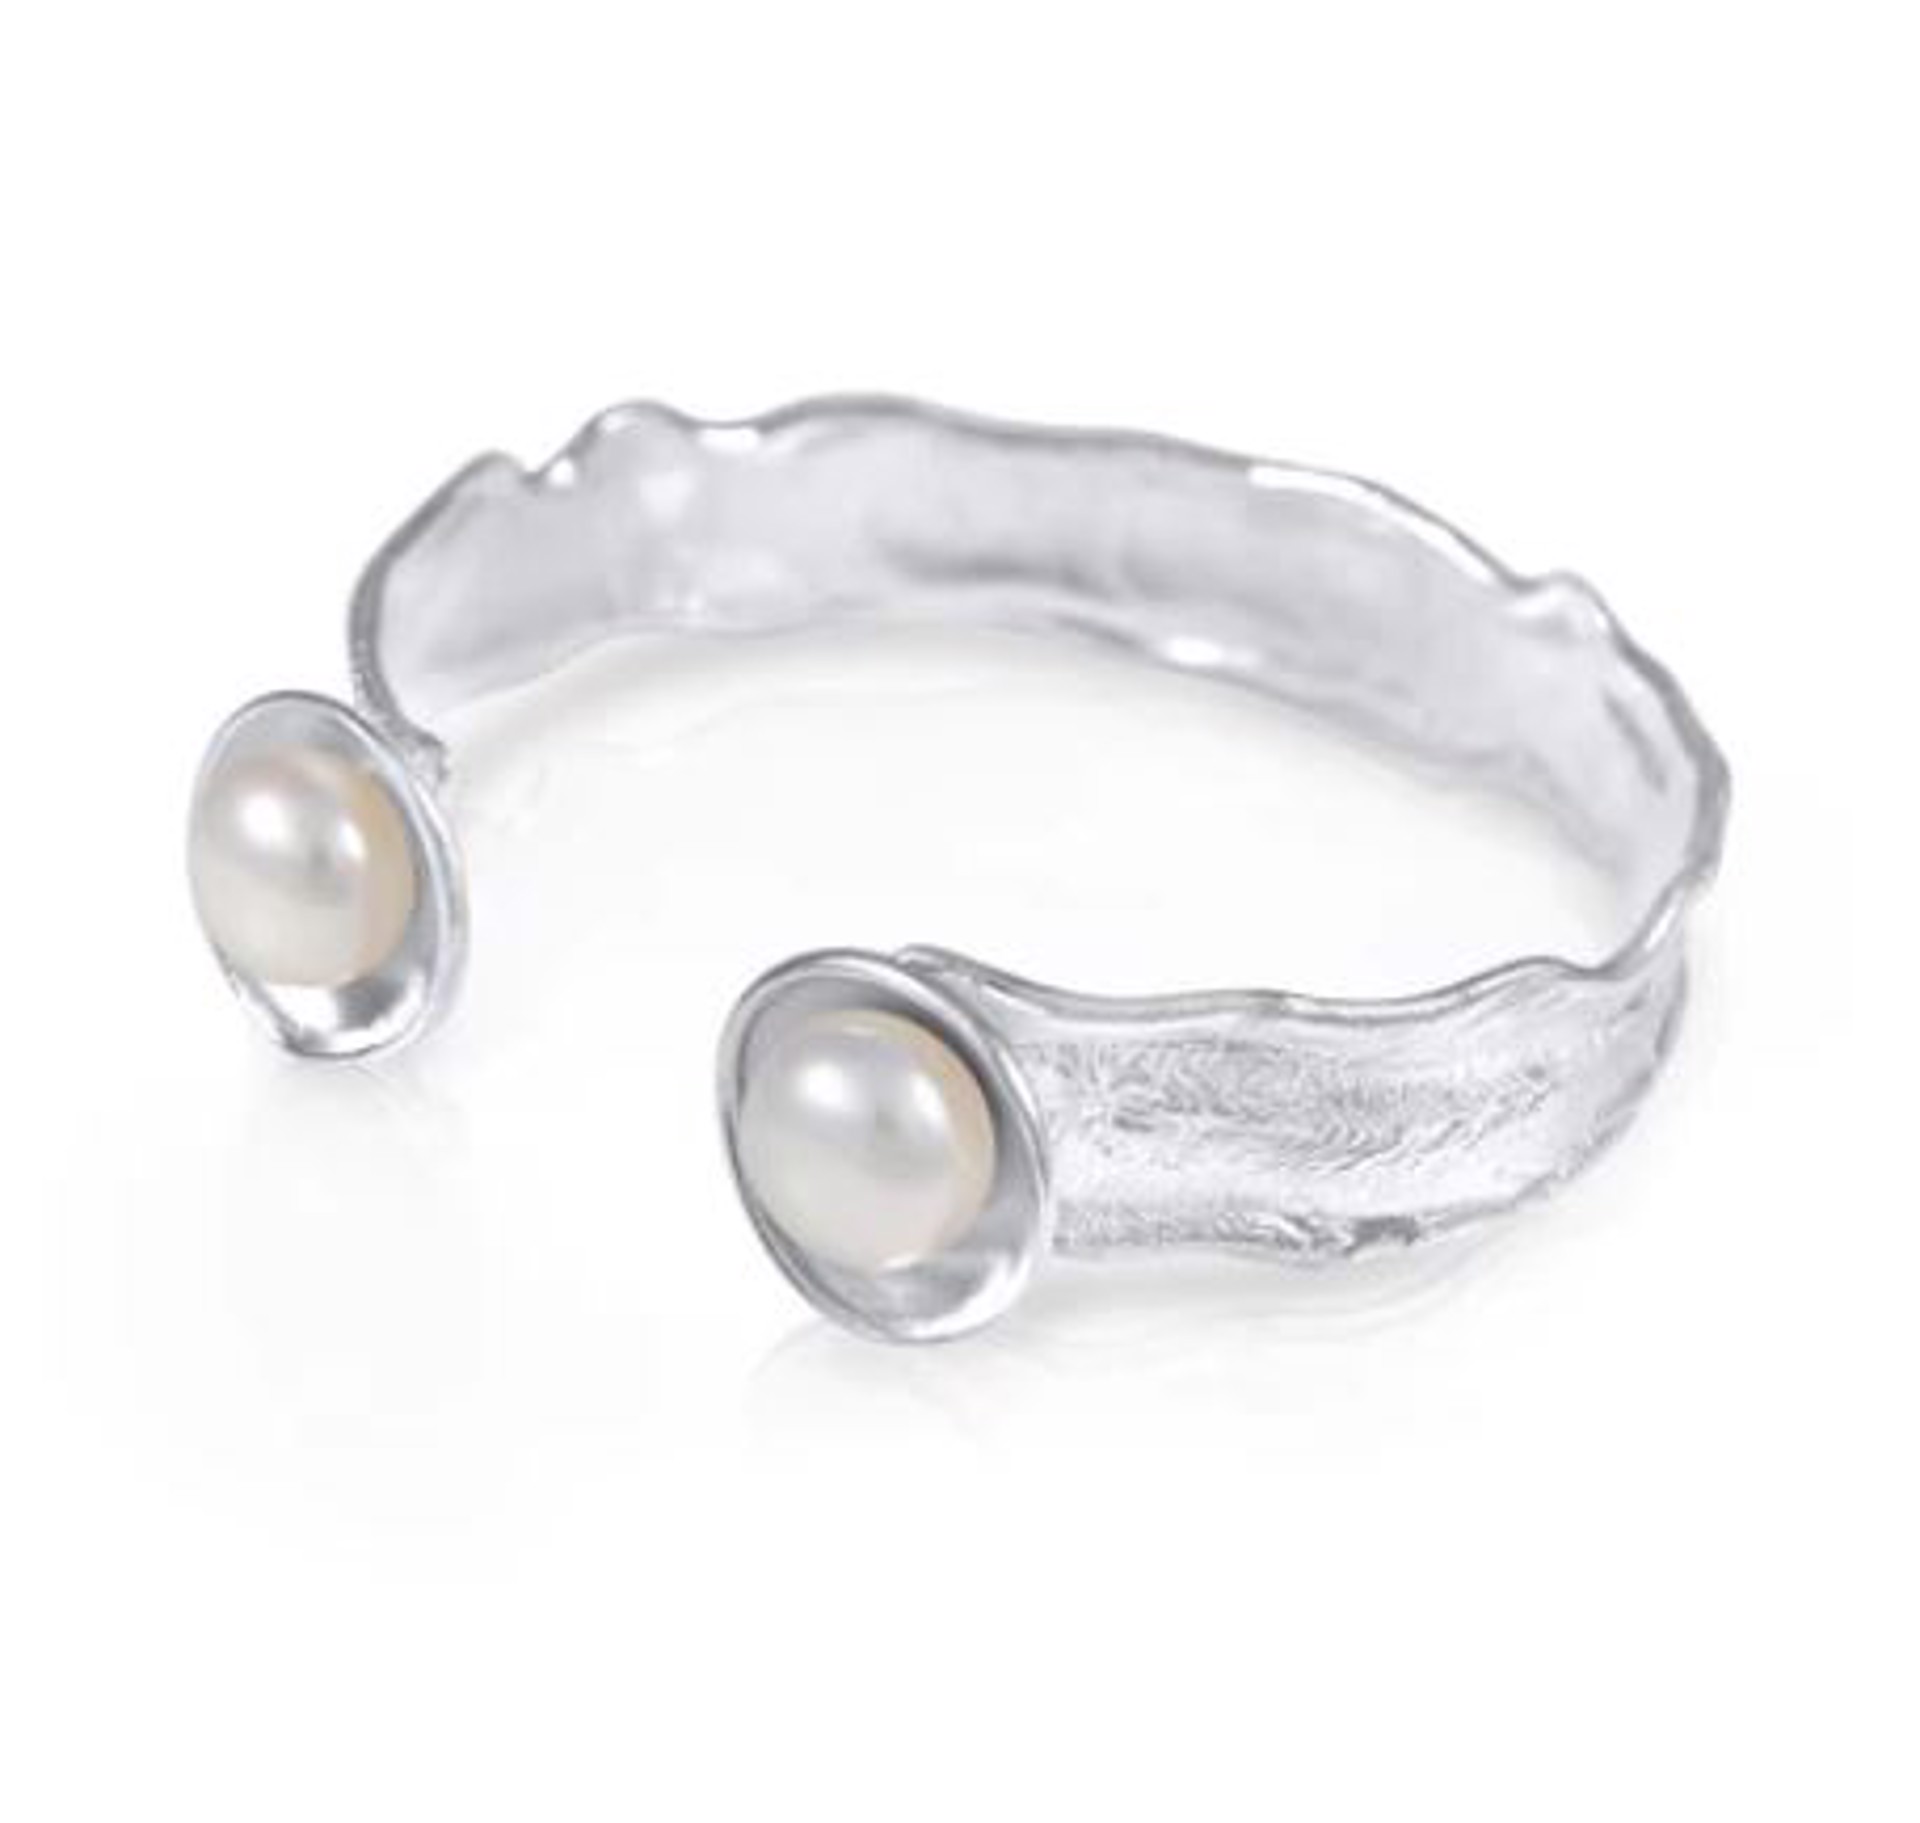 Hammered Pearl Bangle - Wide by Kristen Baird